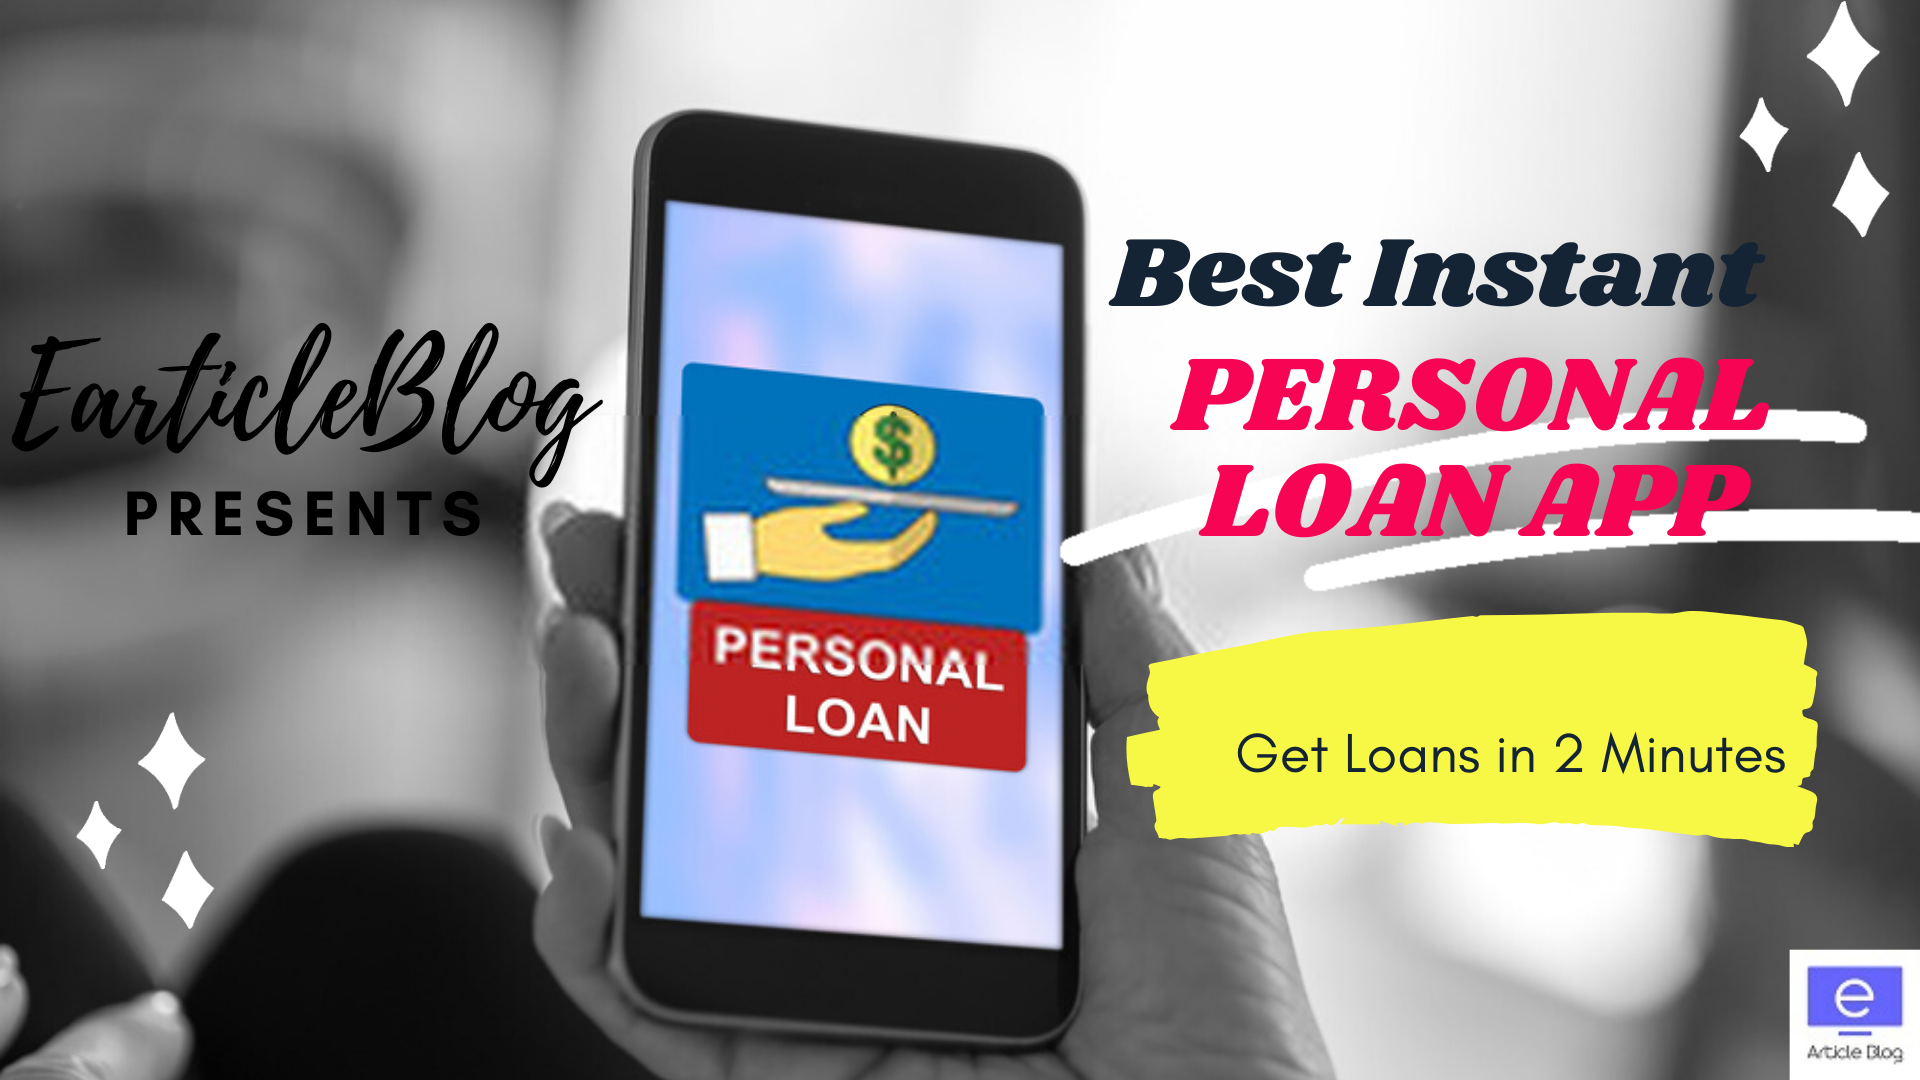 Choose the Best Personal Loan App for Meeting Emergency Expenses